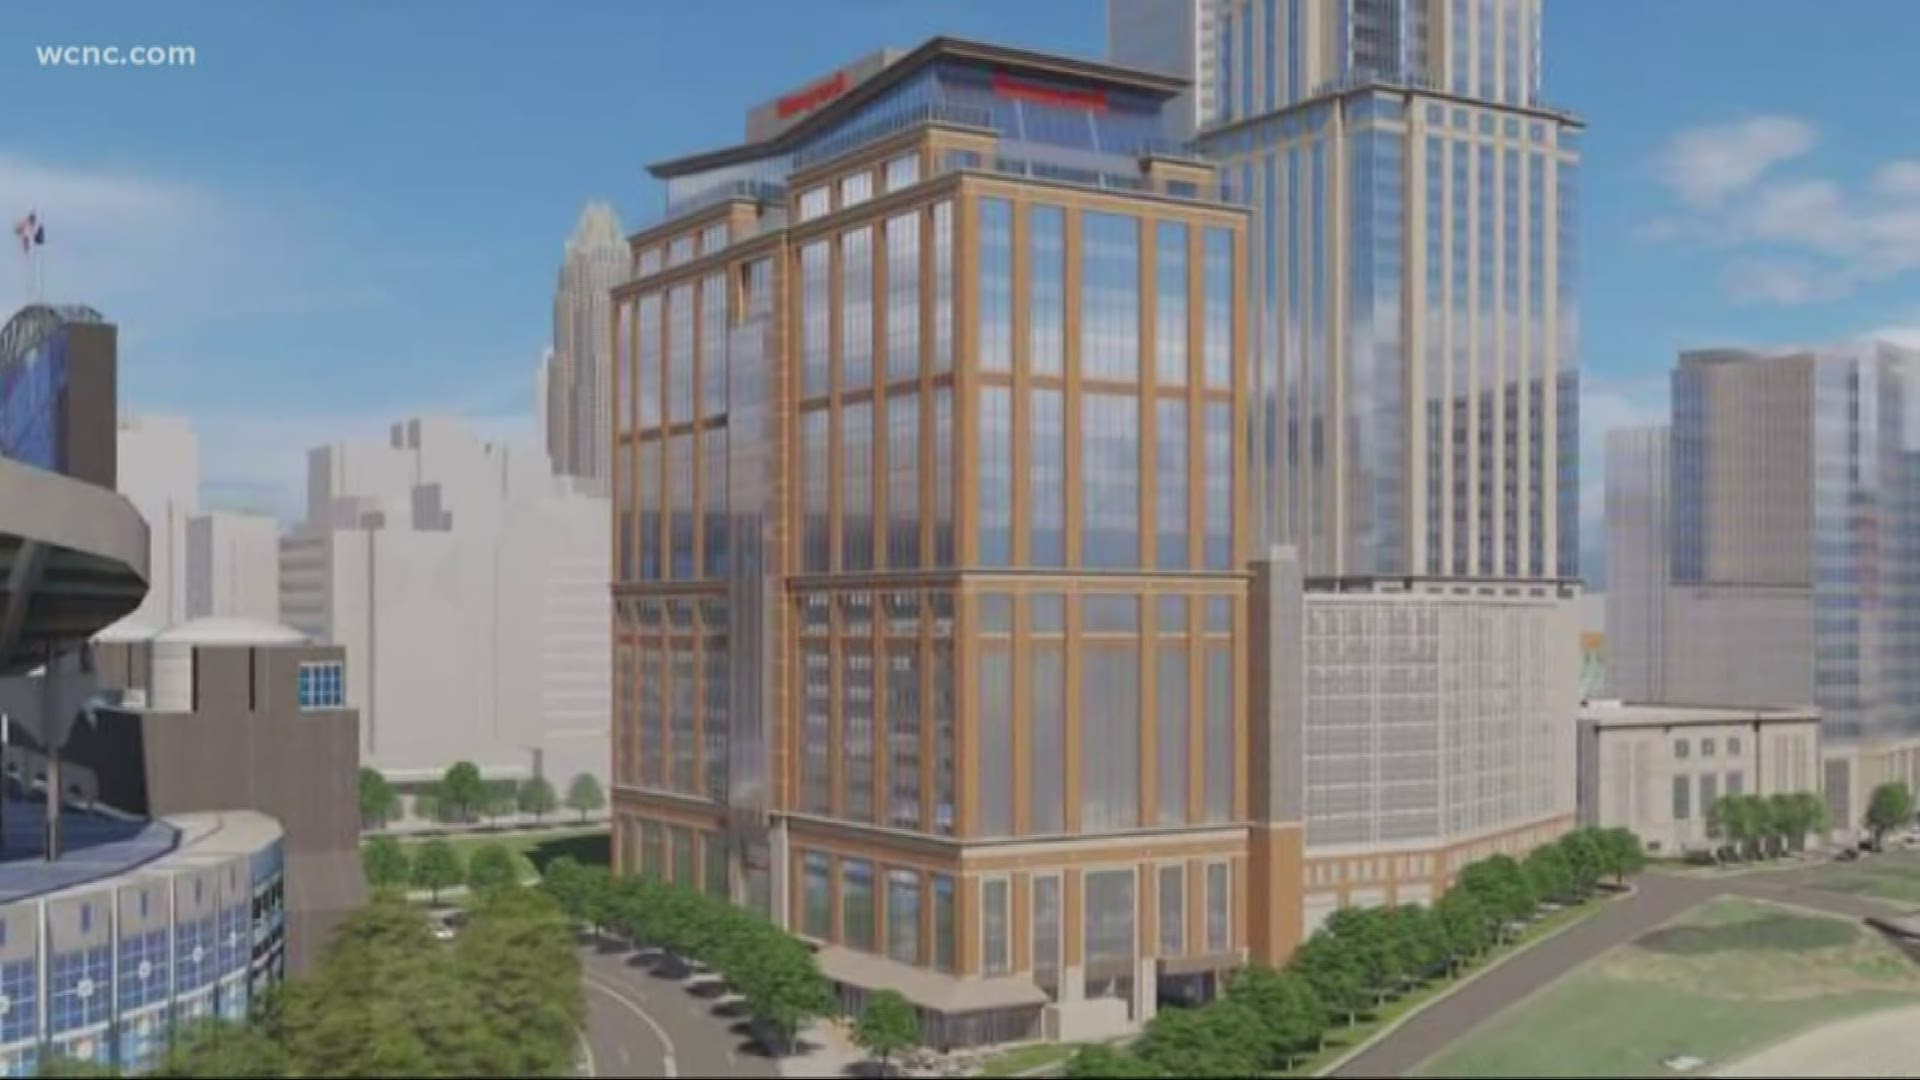 Honeywell's new global headquarters set to be built at the legacy union in uptown. The 23-story tower  will eventually house 750 Honeywell employees on nine floors.